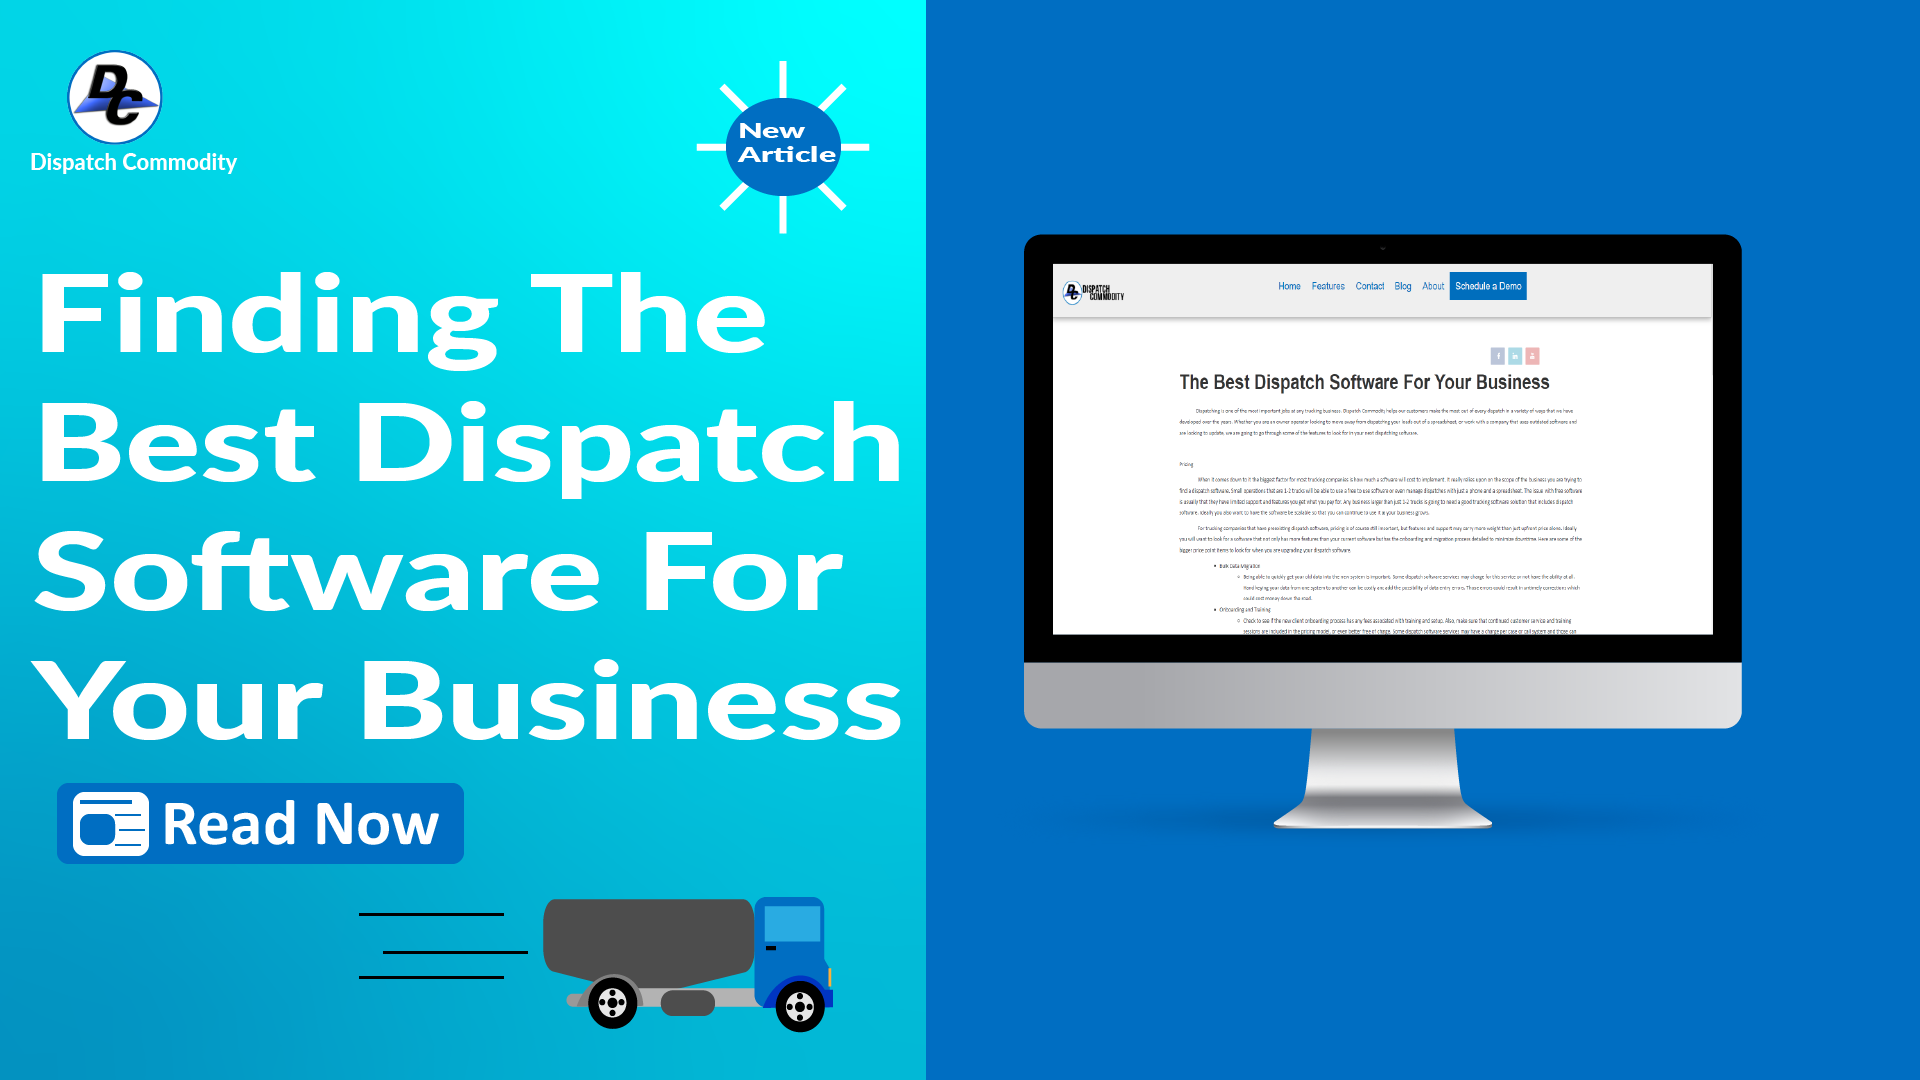 The Best Dispatch Software For Your Business Dispatch Commodity